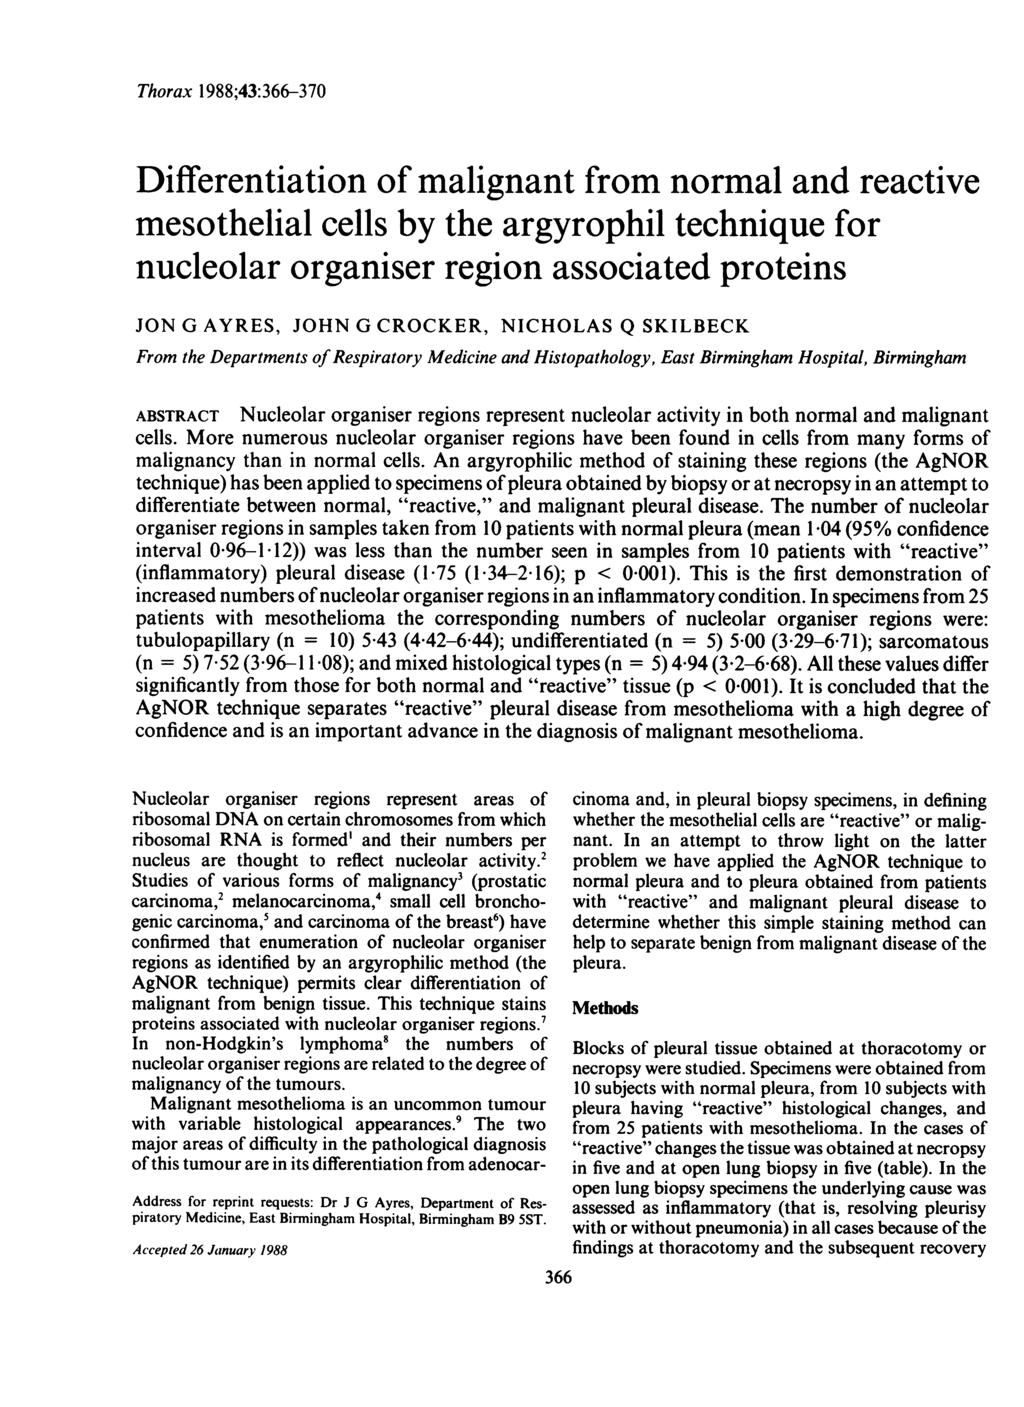 Thorx 1988;43:366-370 Differentition of mlignnt from norml nd rective mesothelil cells by the rgyrophil technique for nucleolr orgniser region ssocited proteins JON G AYRES, JOHN G CROCKER, NCHOLAS Q